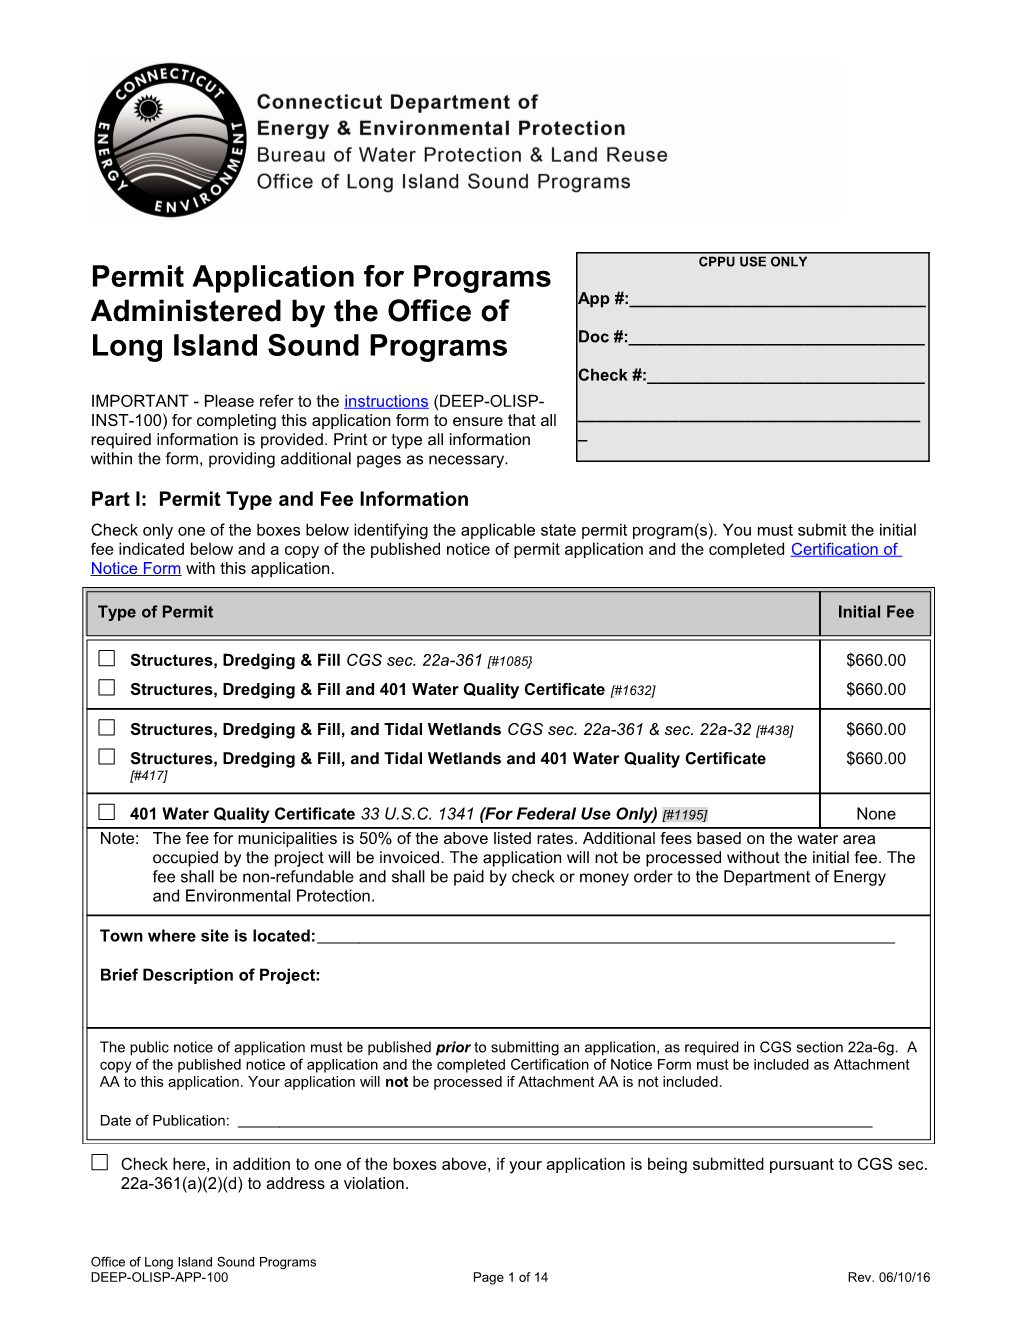 Permit Application for Programs Administered by the Office of Long Island Sound Programs